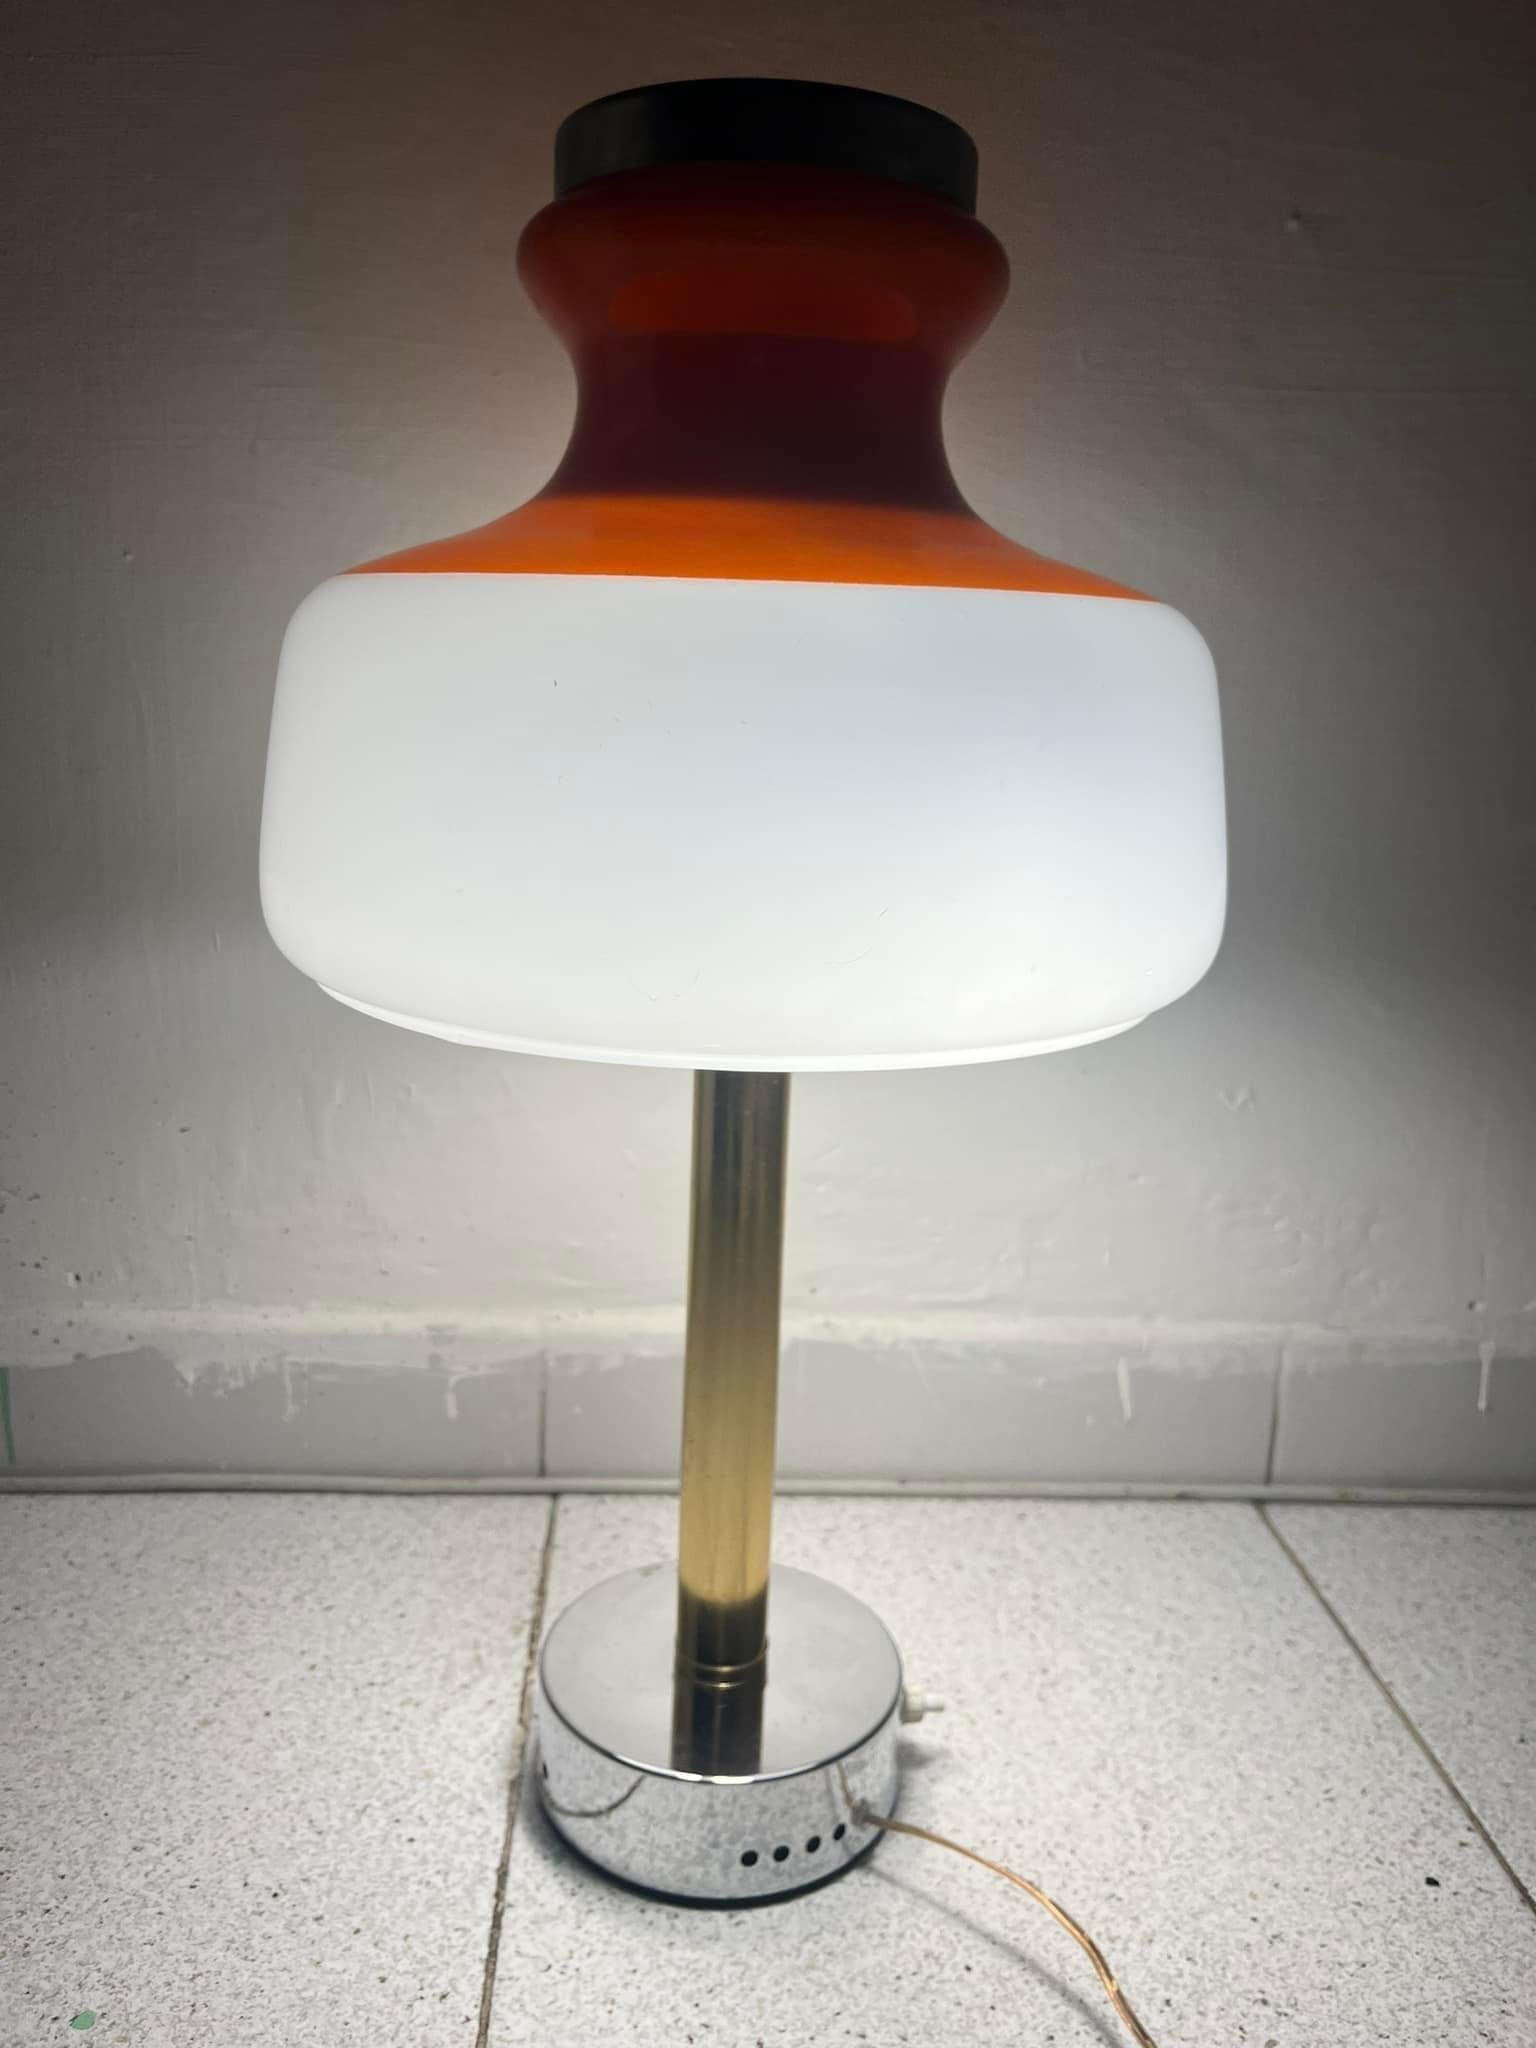 53 cm high glass table lamp 28 cm circumference 